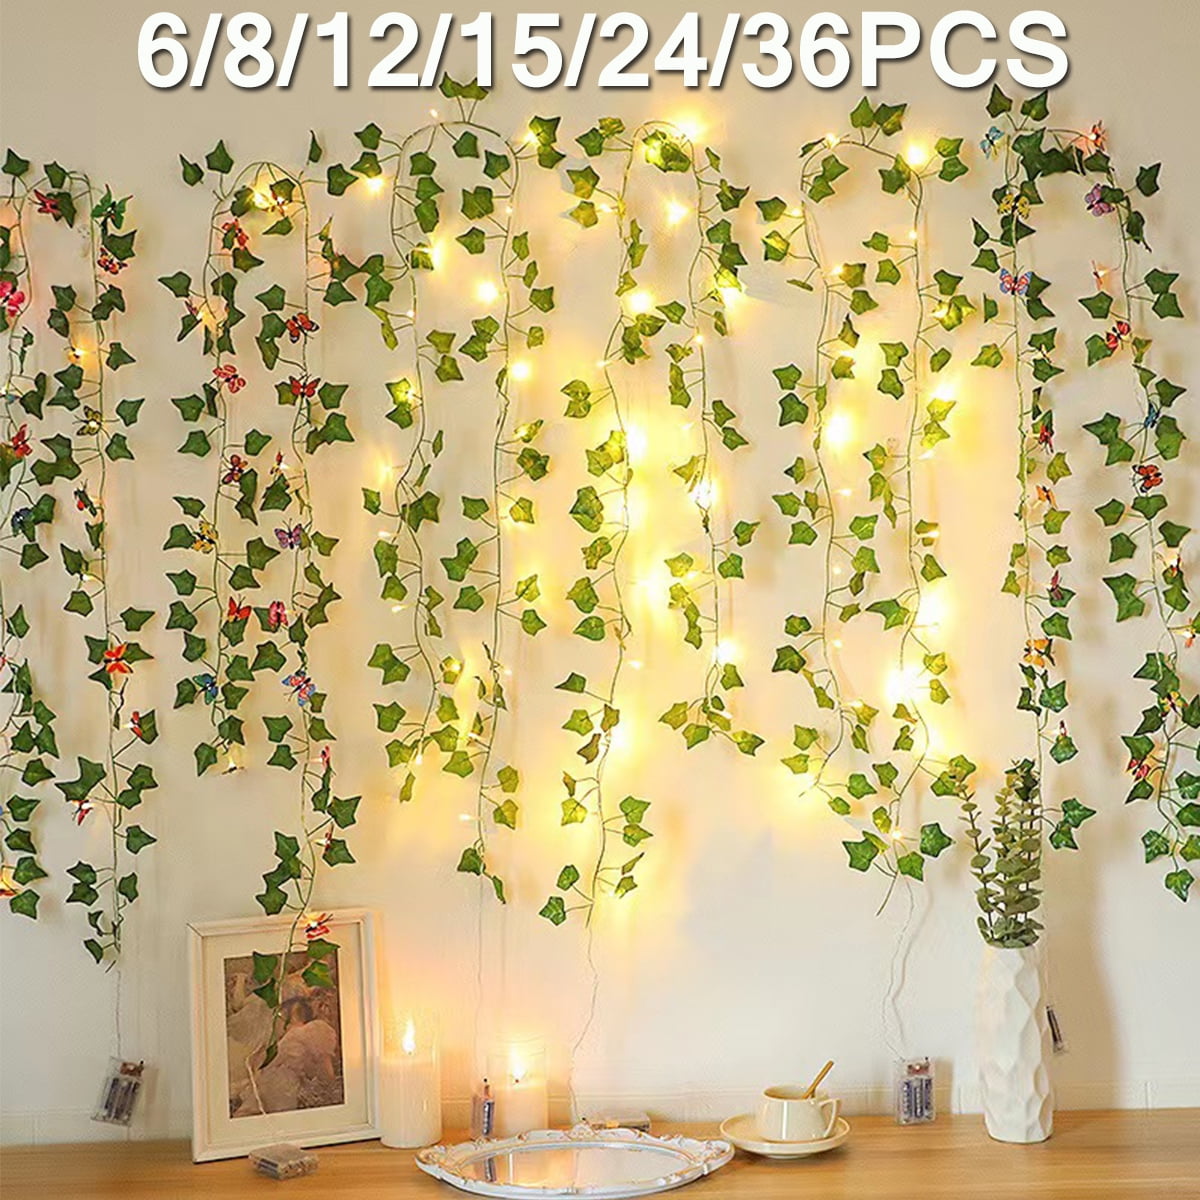 Artificial Ivy Garland, Fake Vines with UV-proof Green Leaves and ...